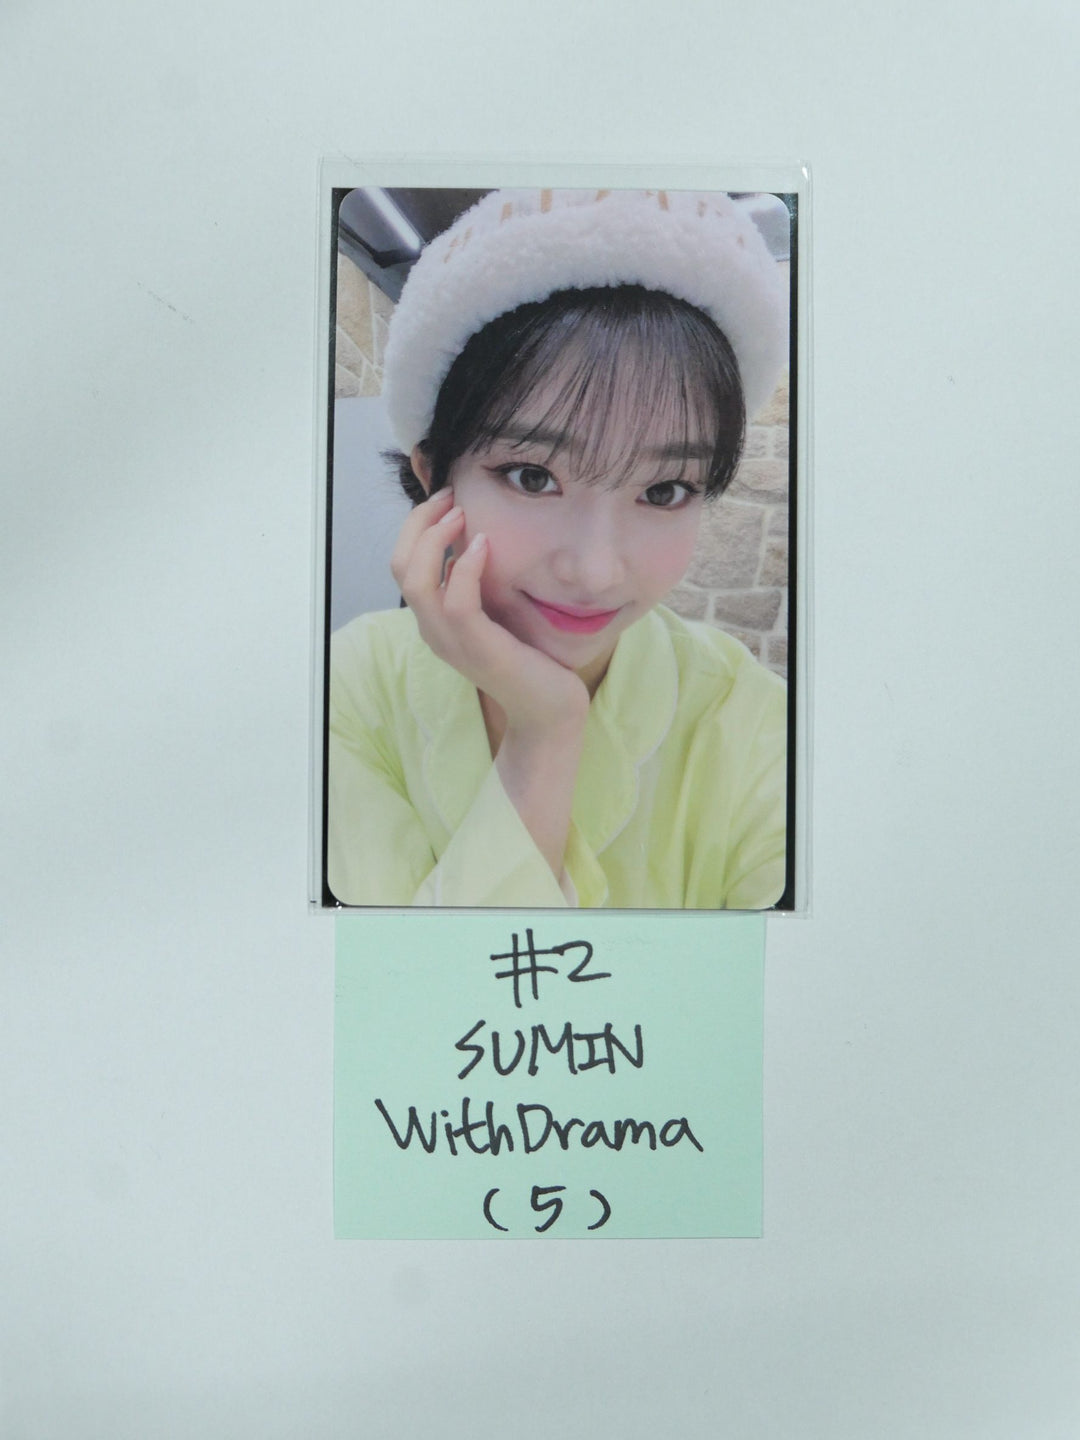 StayC 'YOUNG-LUV.COM' - Withdrama Luckydraw Event PVC Photocard